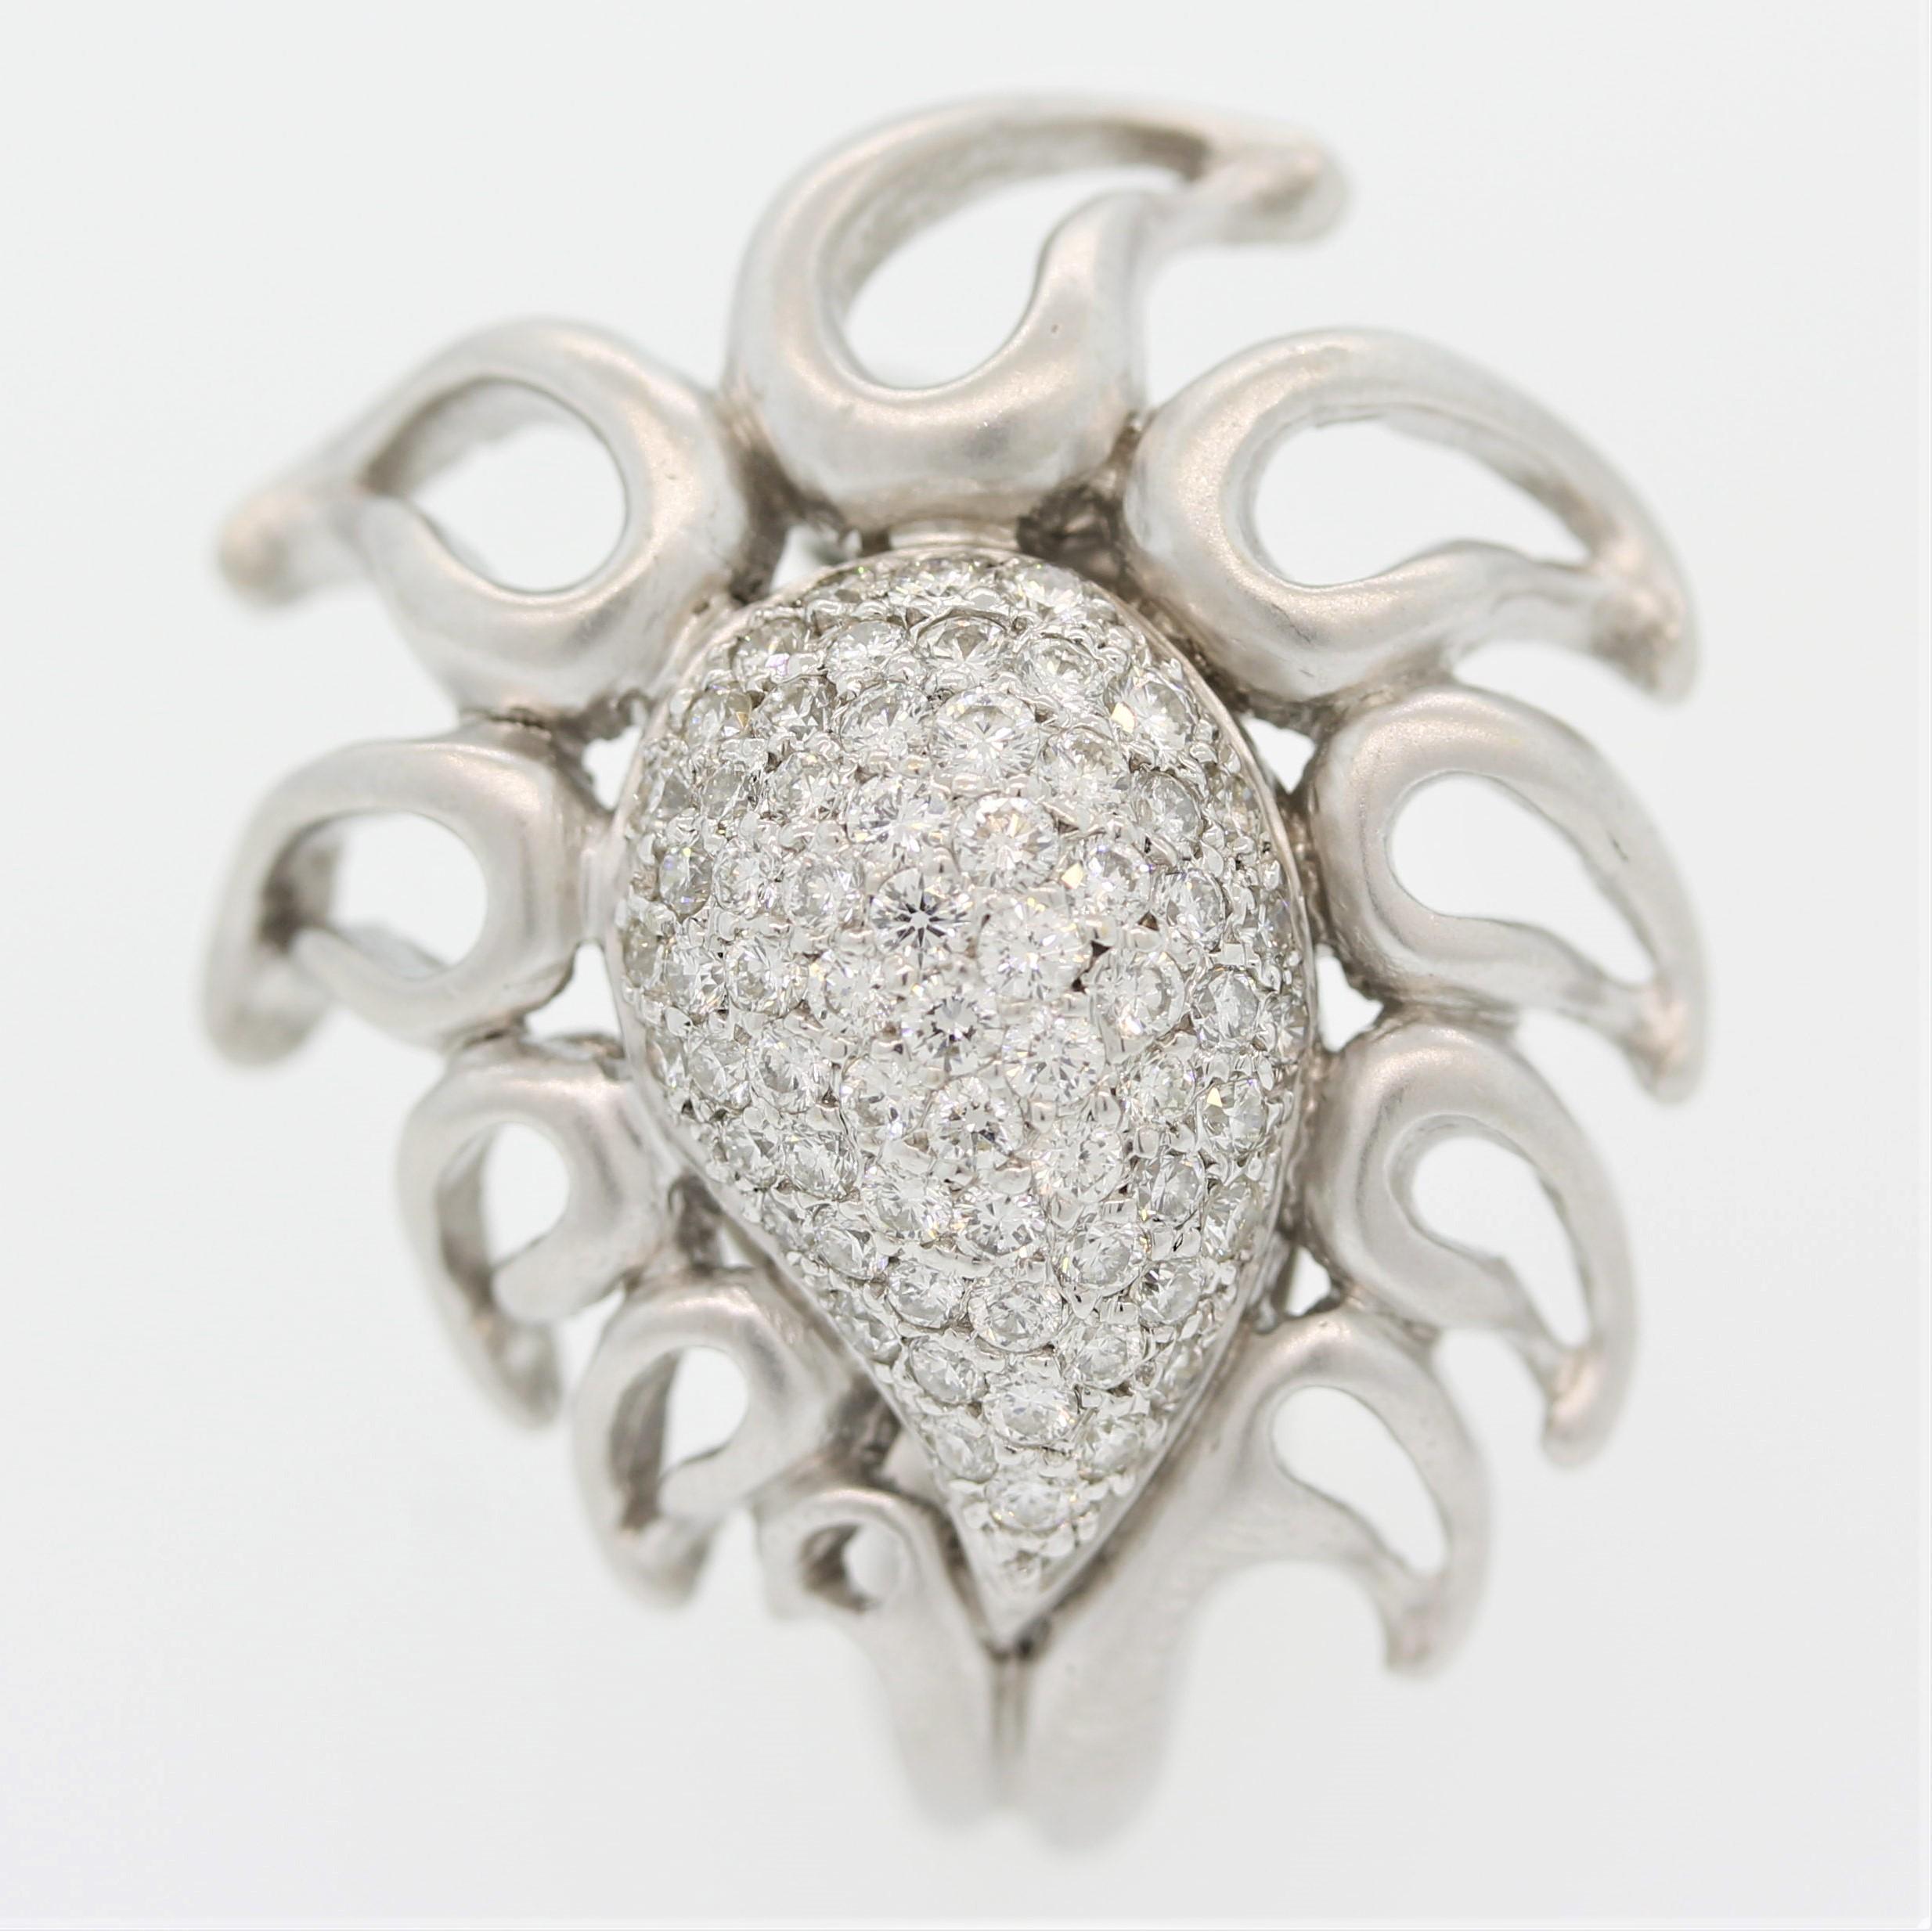 A lovey diamond ring by designer Donald Huber. It features 1.15 carats of fine round brilliant cut diamonds which are pave set with gold flames emanating around it. Made in 18k white gold, the piece has a soft satin finish that adds to the unique